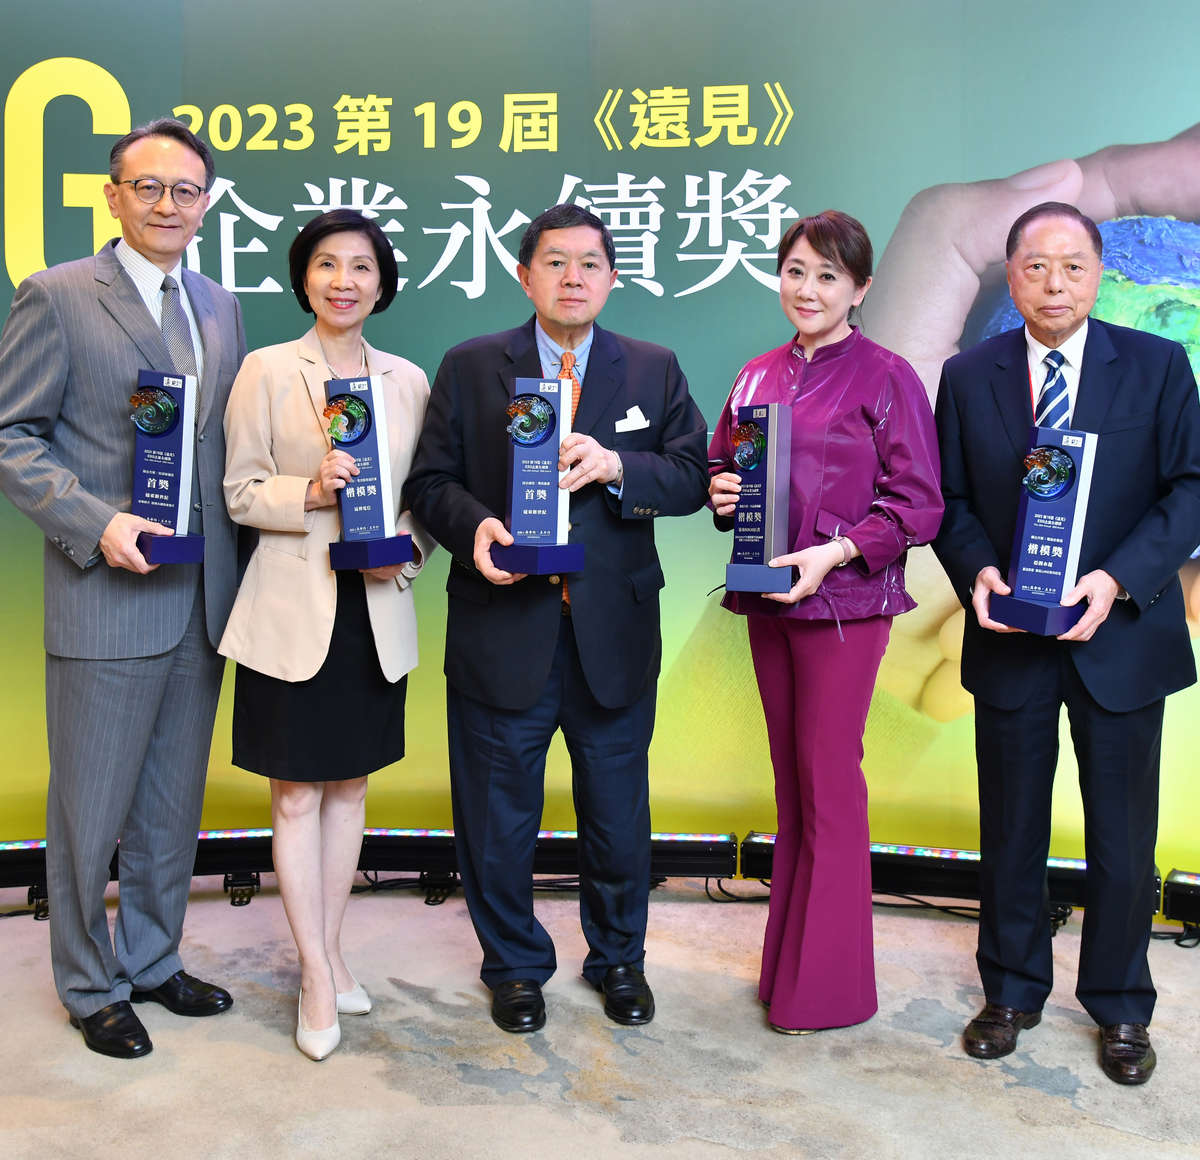 FEG Won Seven ESG Awards Hosted by CW Magzine in 2023